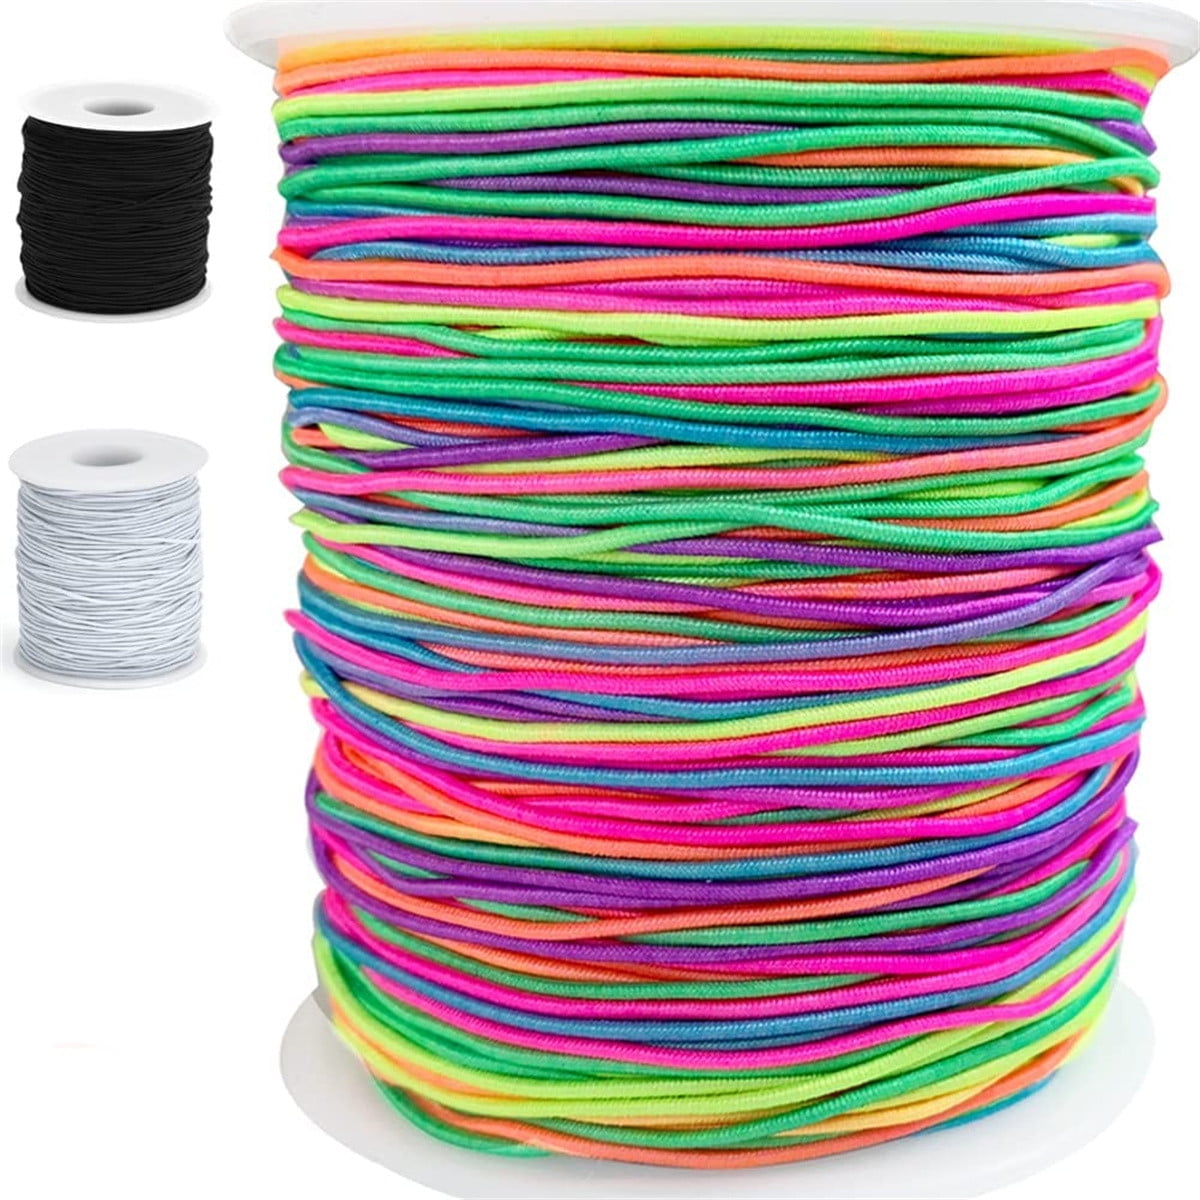 Biplut Mixed Color Acrylic Spacer Beads Elastic String Kids DIY Bracelet Jewelry Toy, Kids Unisex, Size: 15, 5#